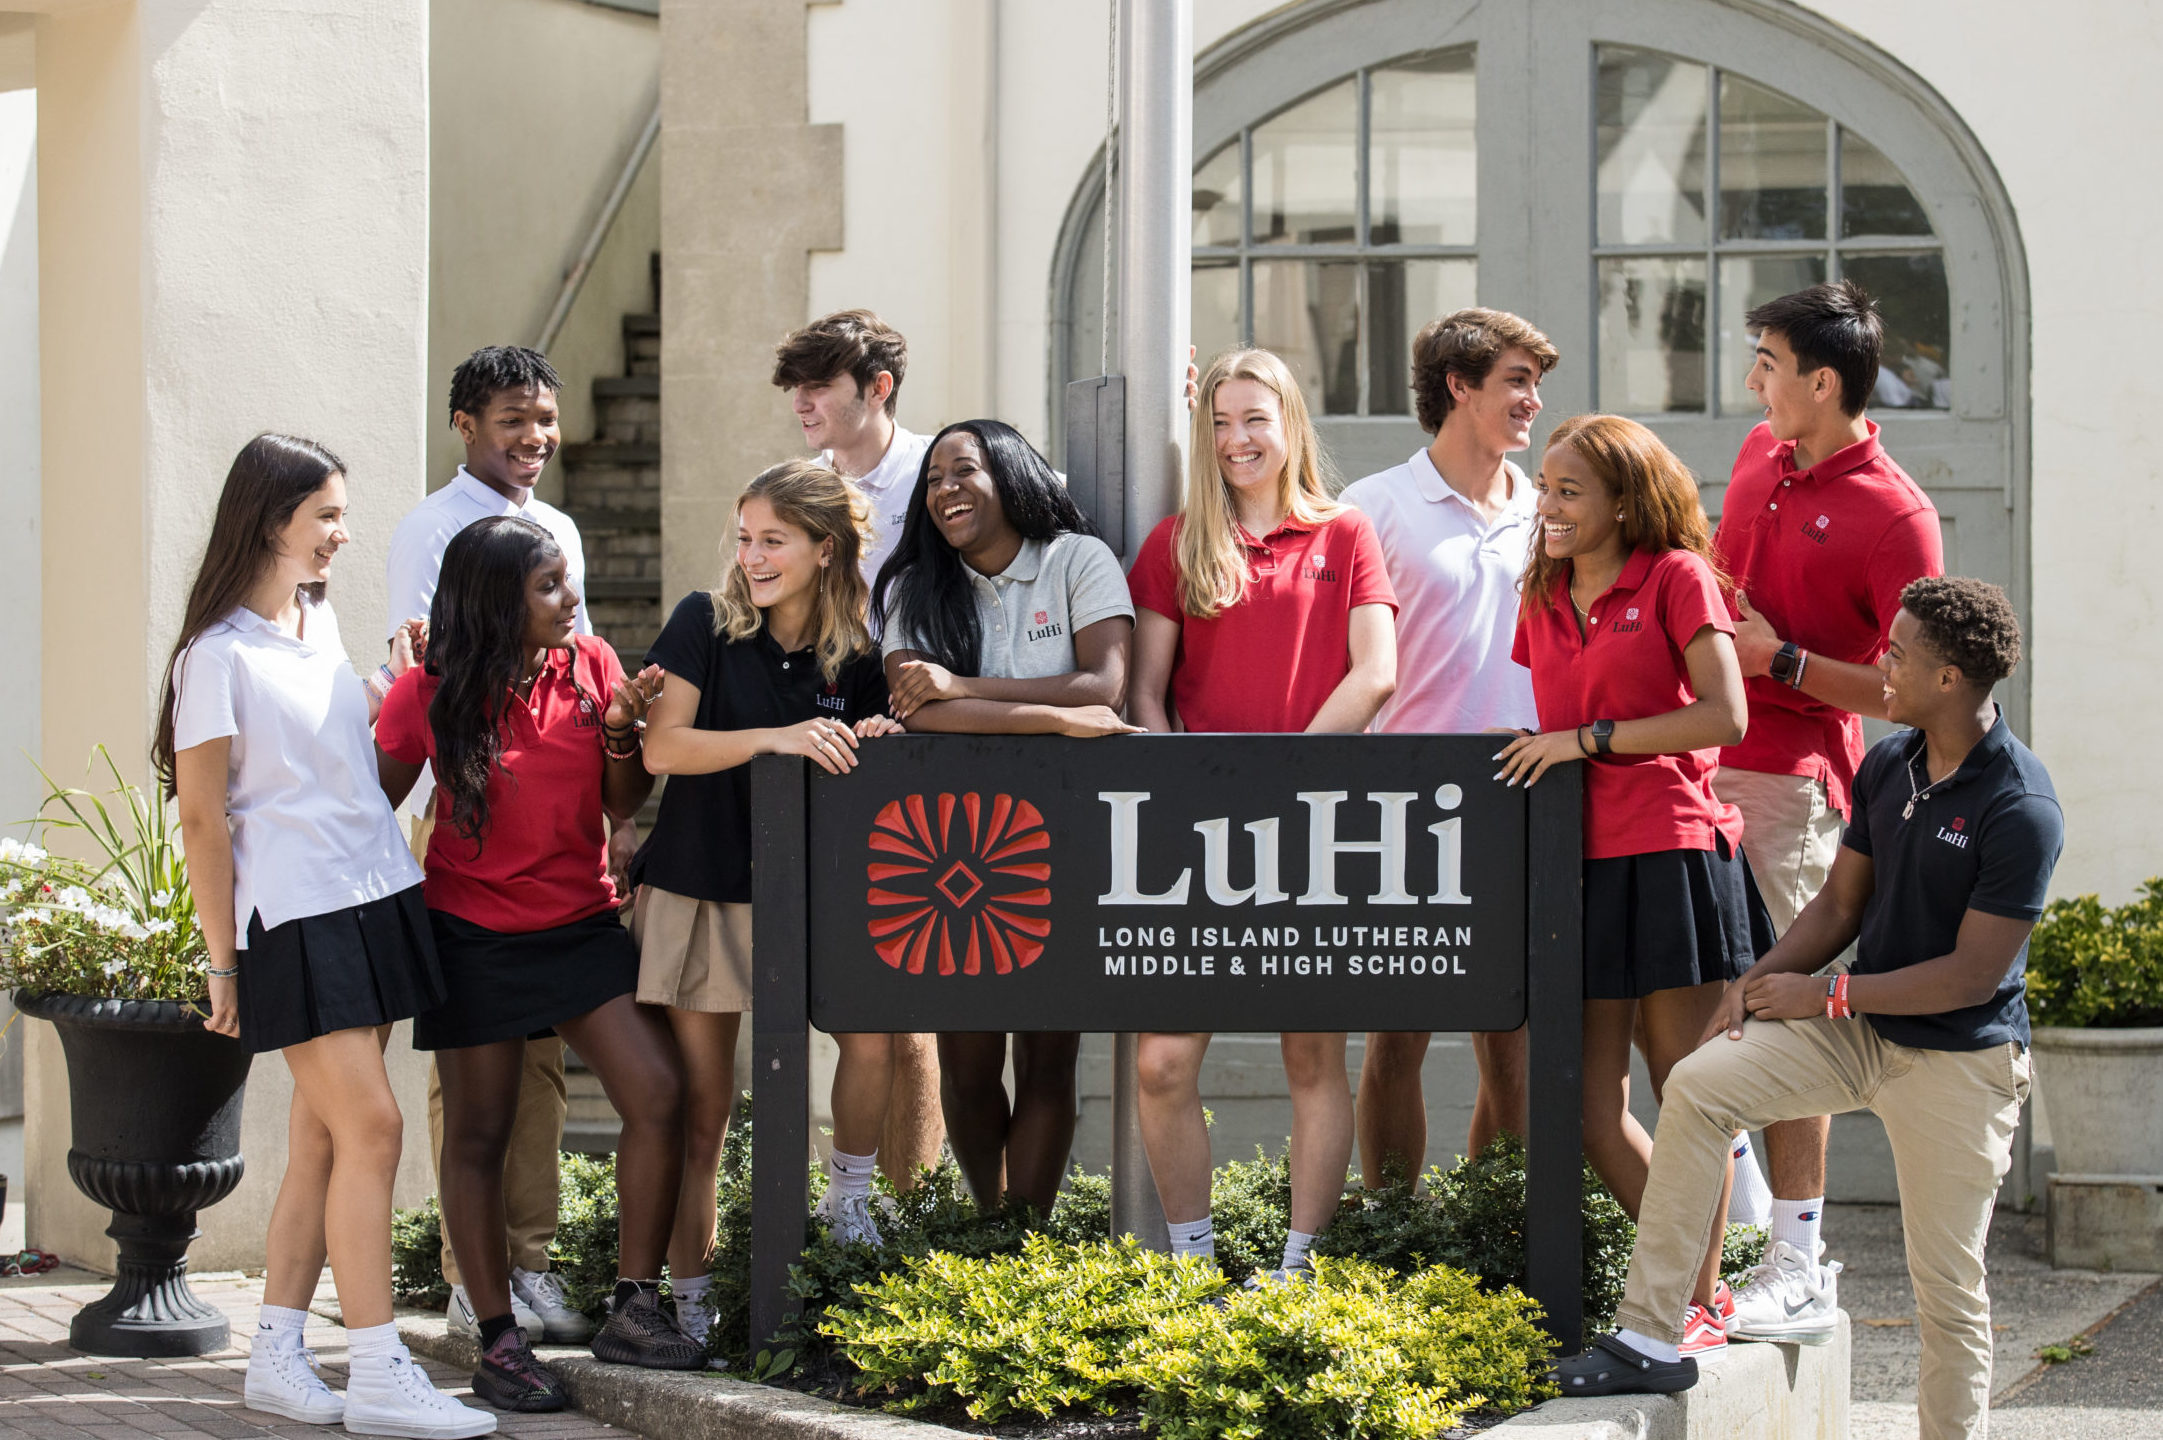 Group of LuHi students laughing around the school sign